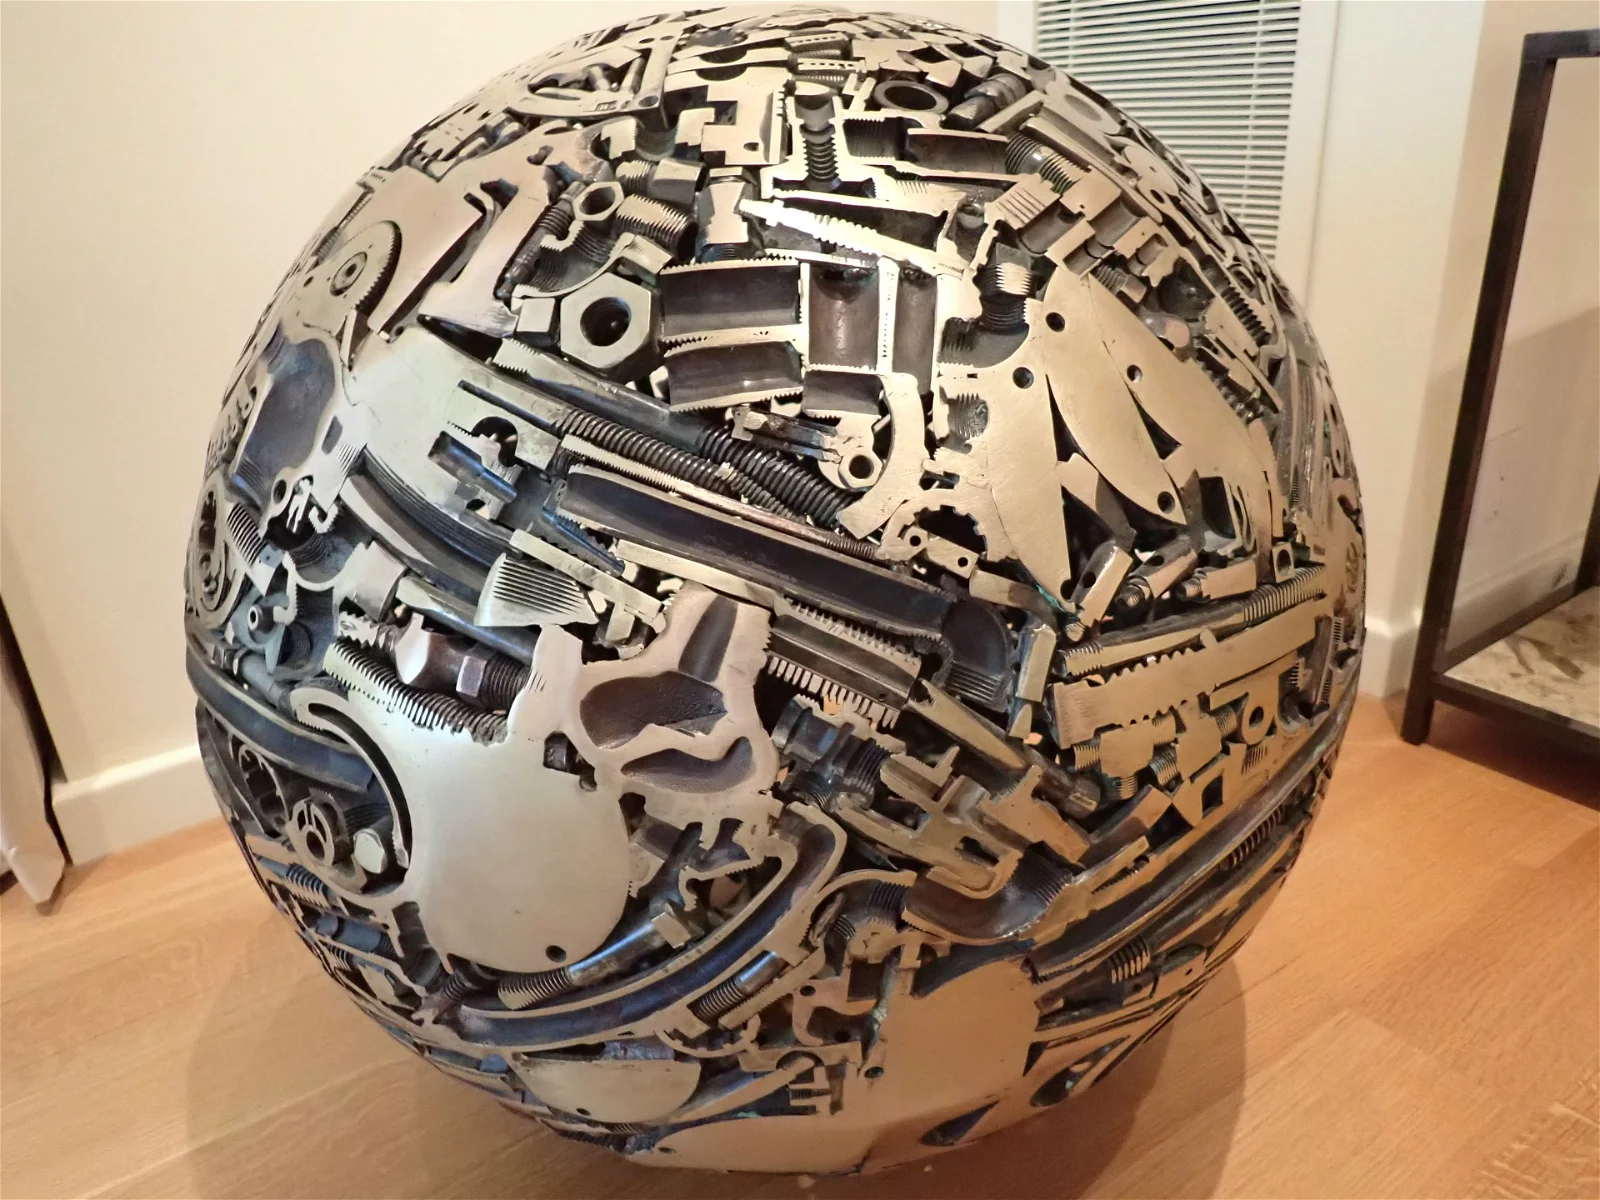 1982 Michael Malpass Sunset Sphere II Metal Sculpture - sold at auction for $6,500 from Boston estate